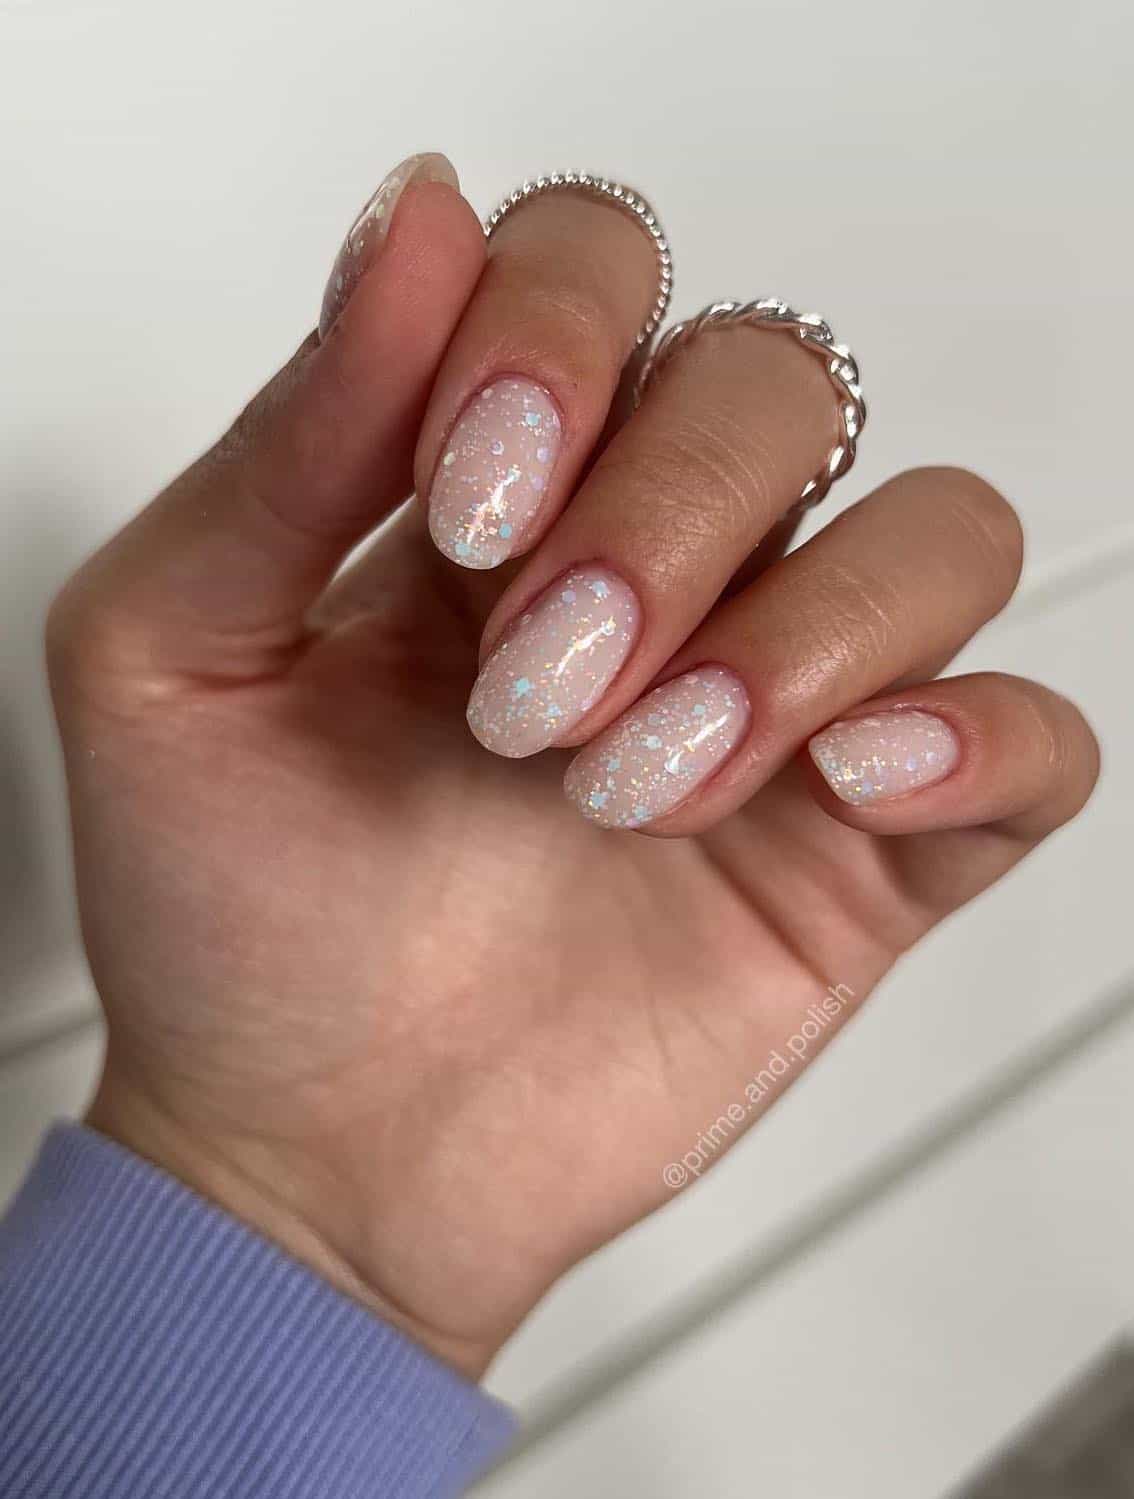 A hand with short round nails painted fully in a glitter nail polish